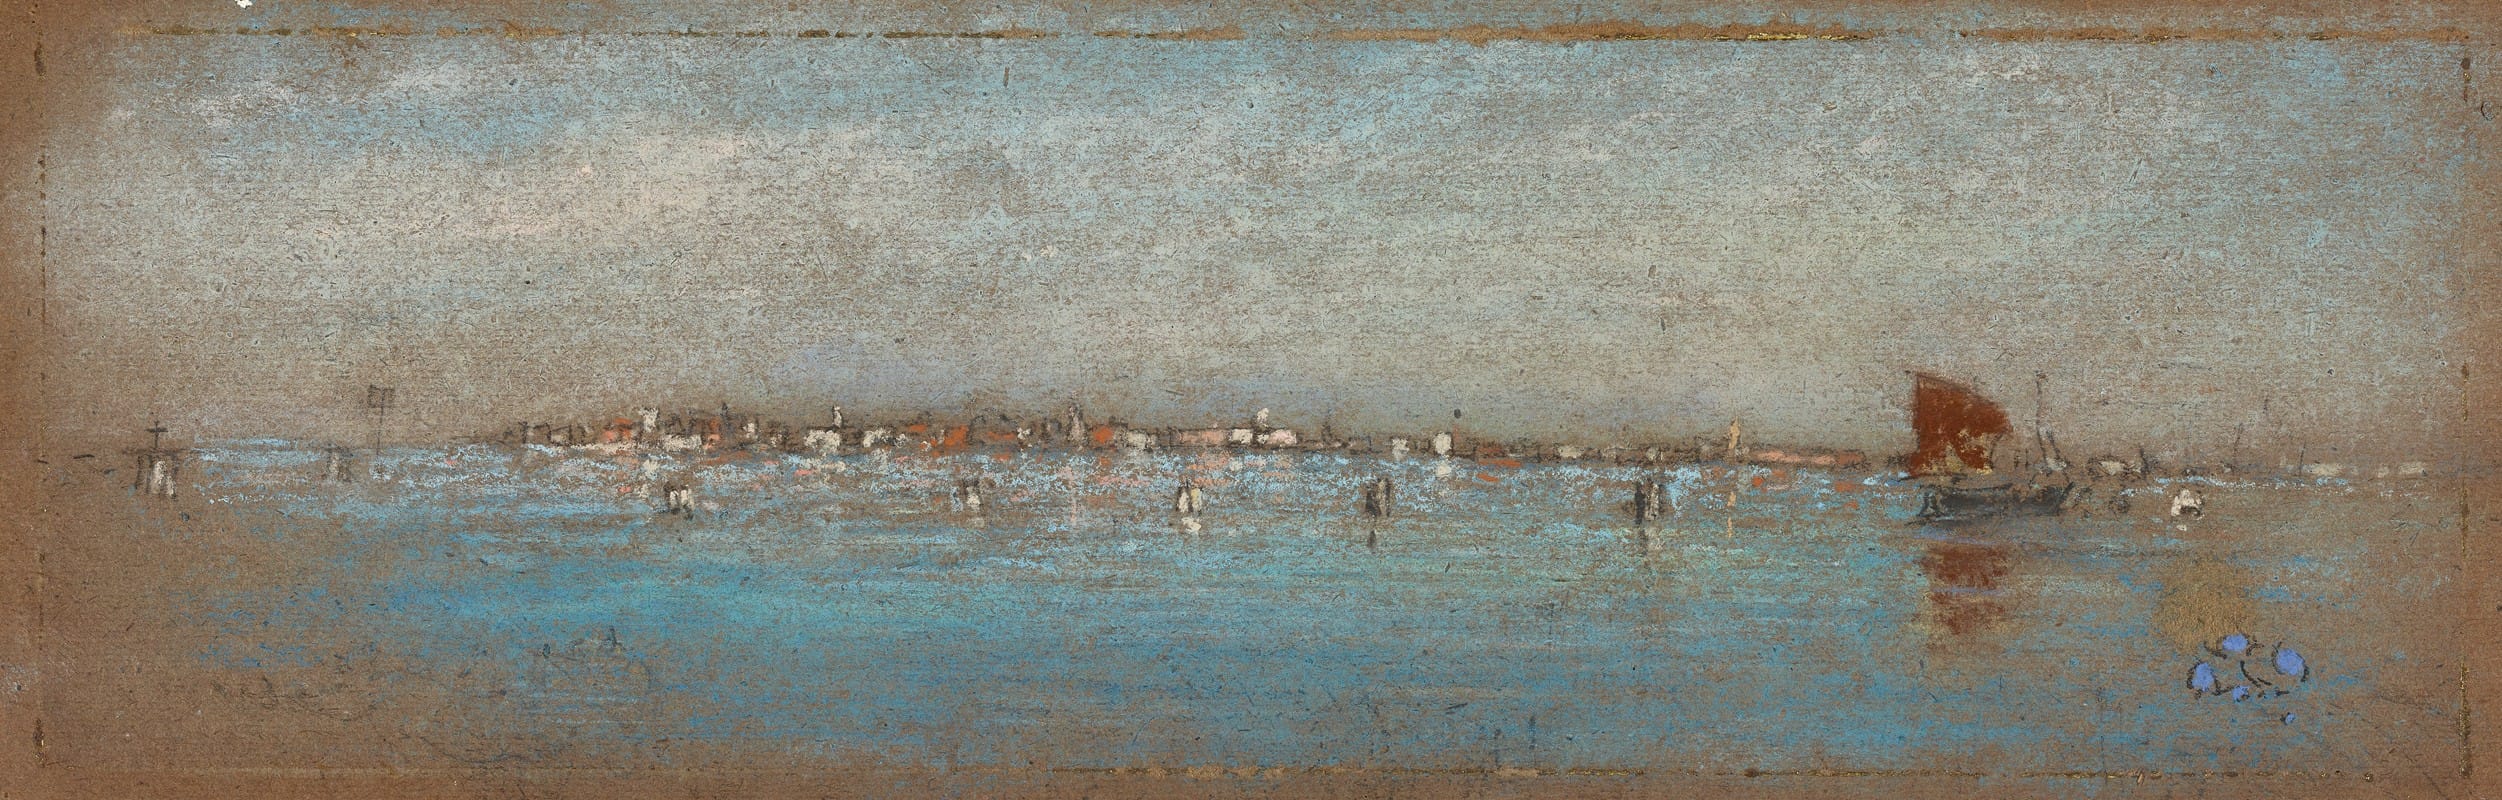 James Abbott McNeill Whistler - Blue and Silver—The Islands, Venice